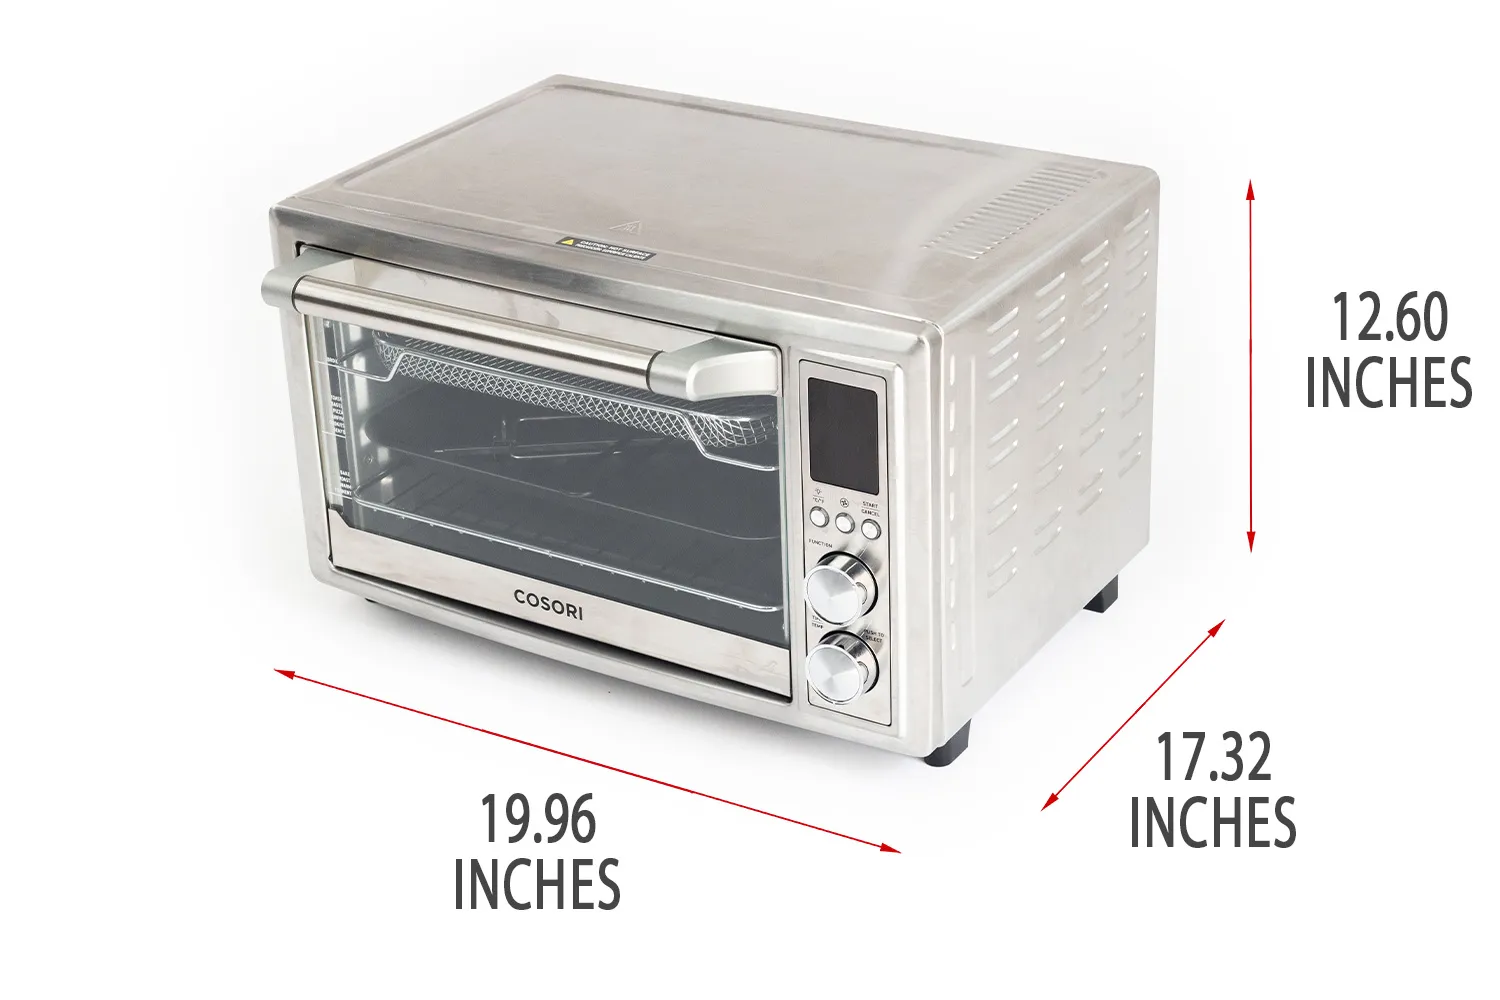 https://cdn.healthykitchen101.com/reviews/images/toaster-ovens/clbyush8f001862880agd687w.jpg